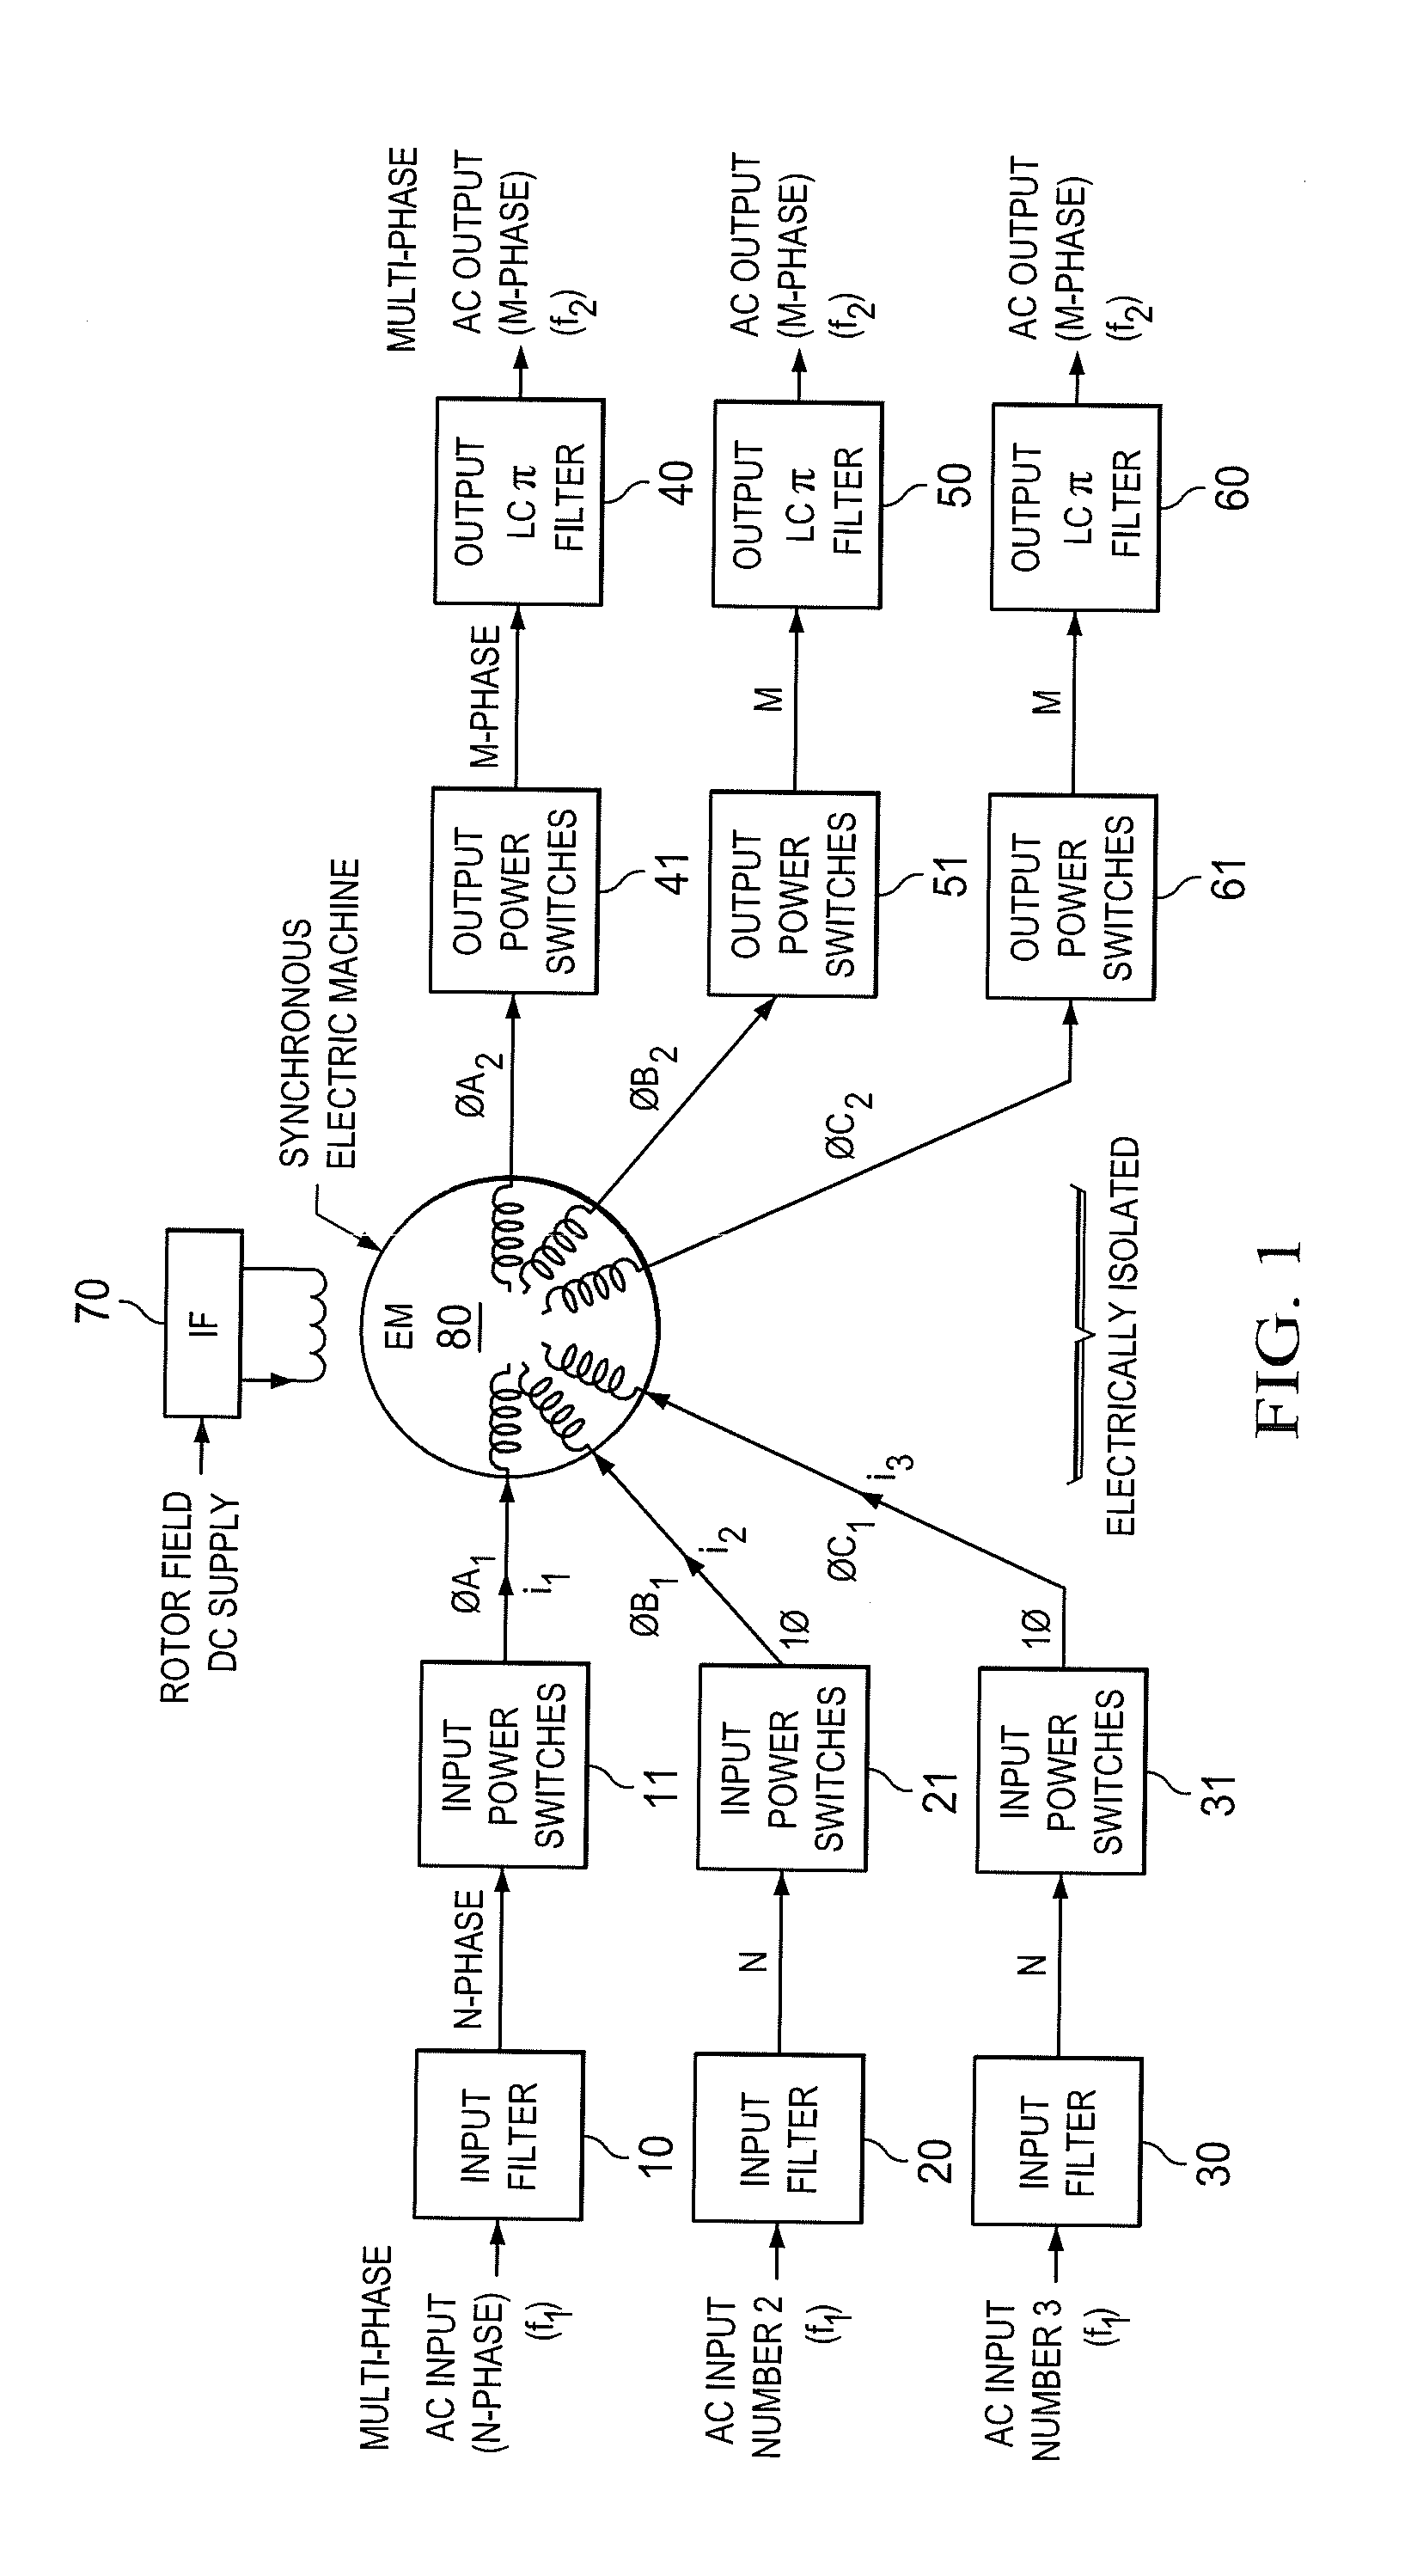 Inertial energy storage system and hydro-fluoro-ether power transformer scheme for radar power systems and large pfn charging